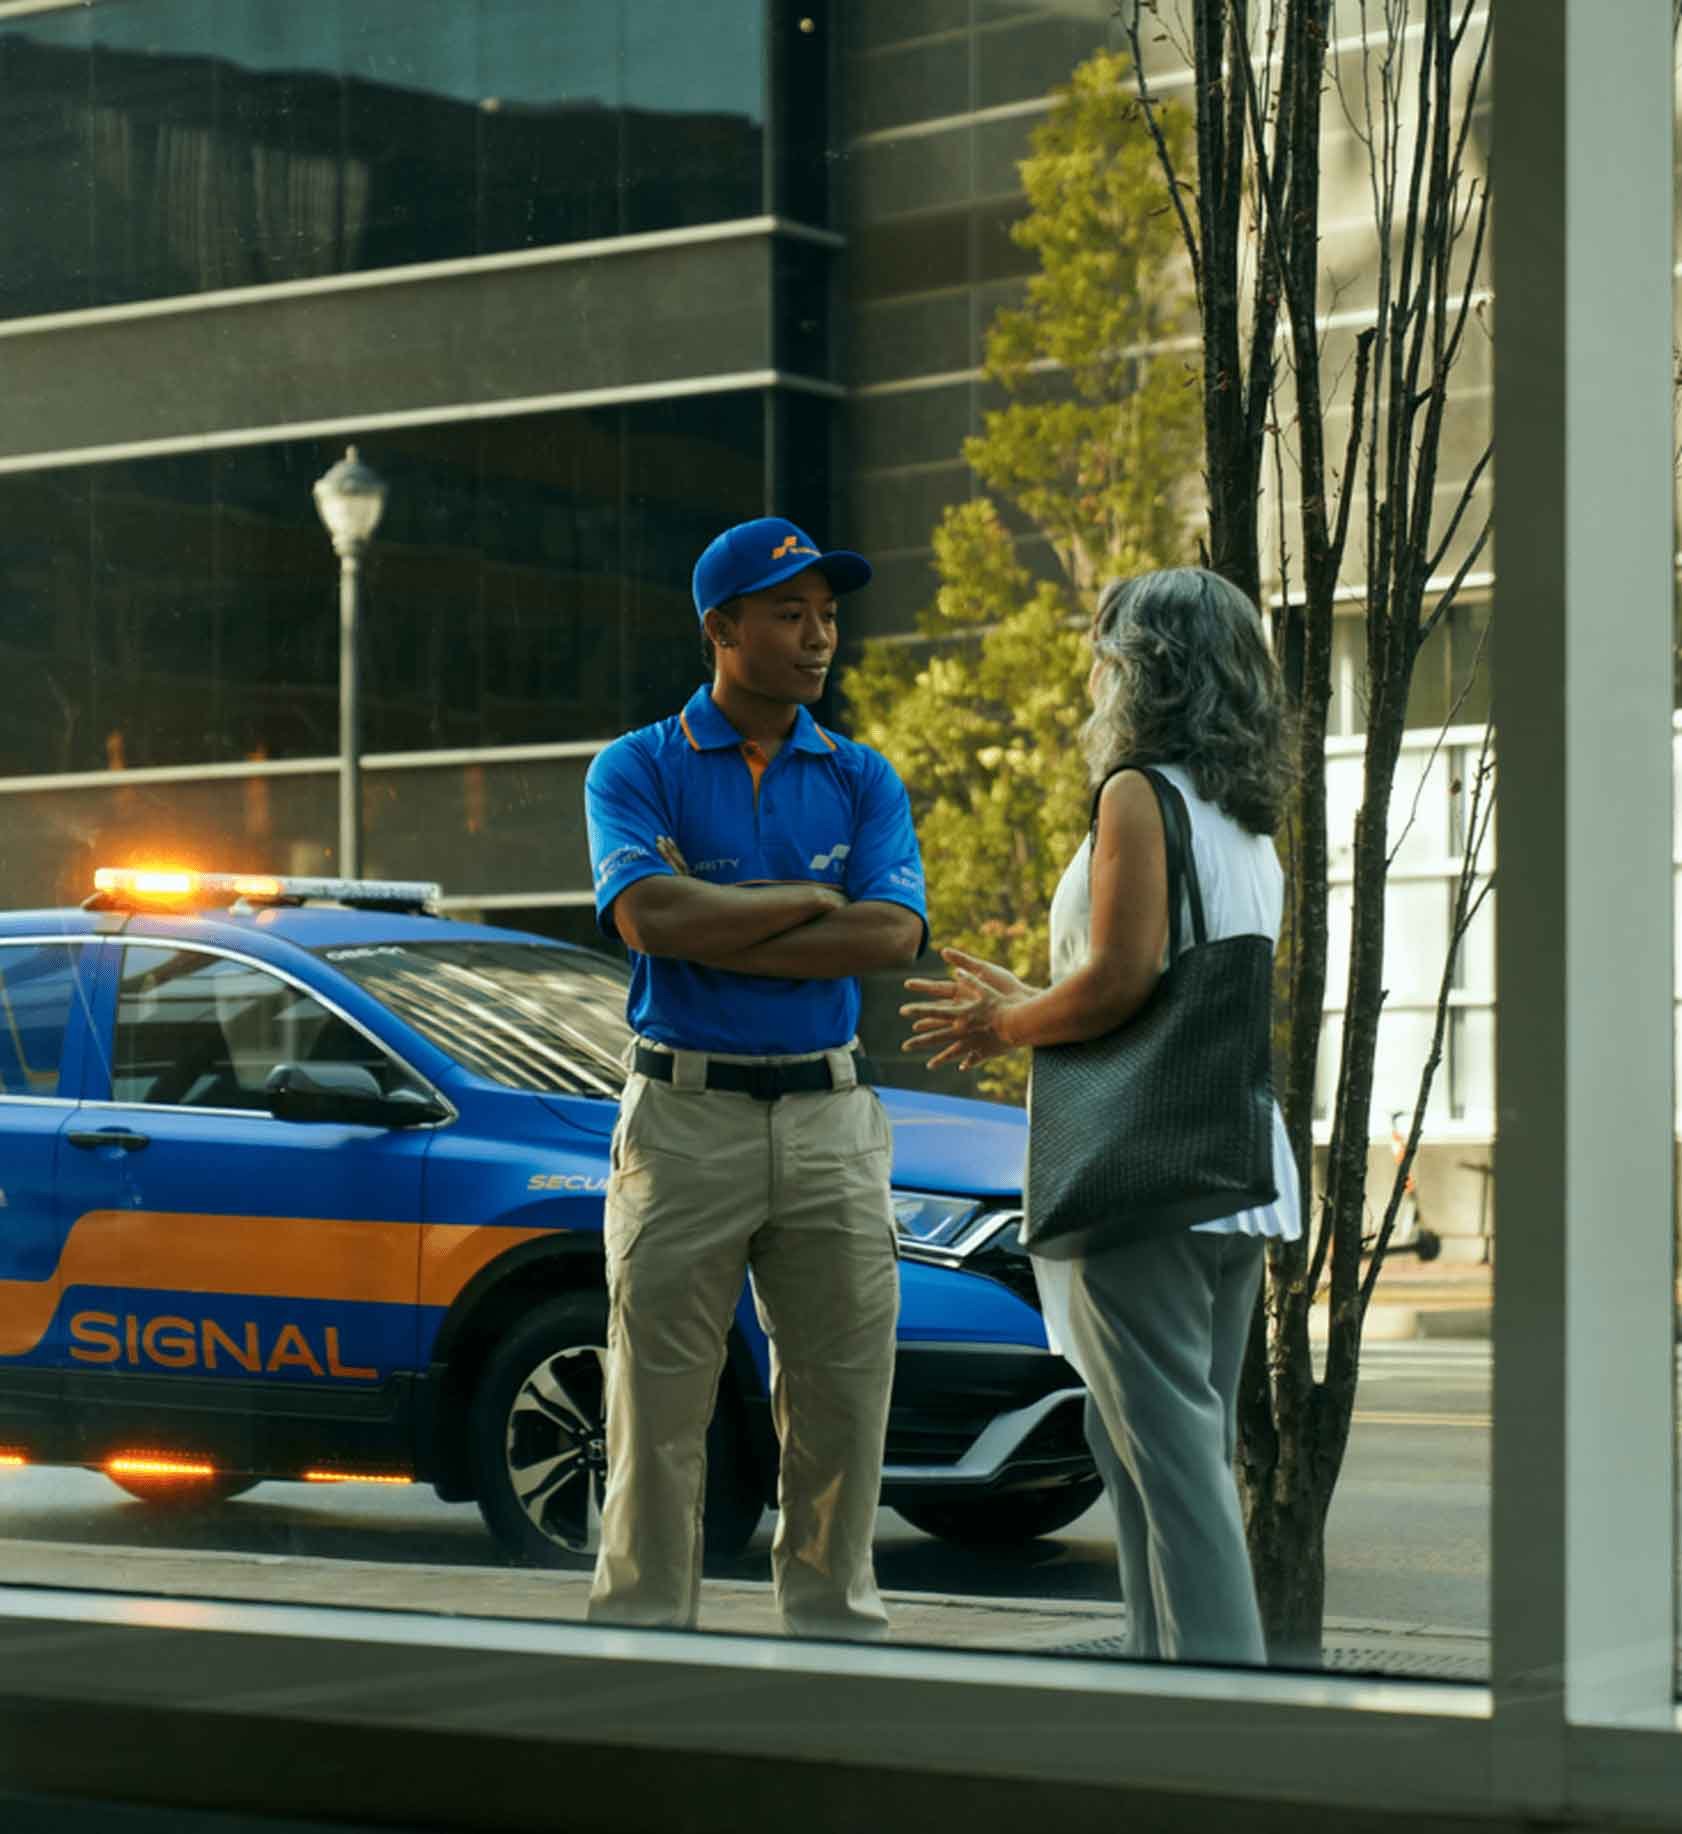 Signal employee talking to someone outside of a building